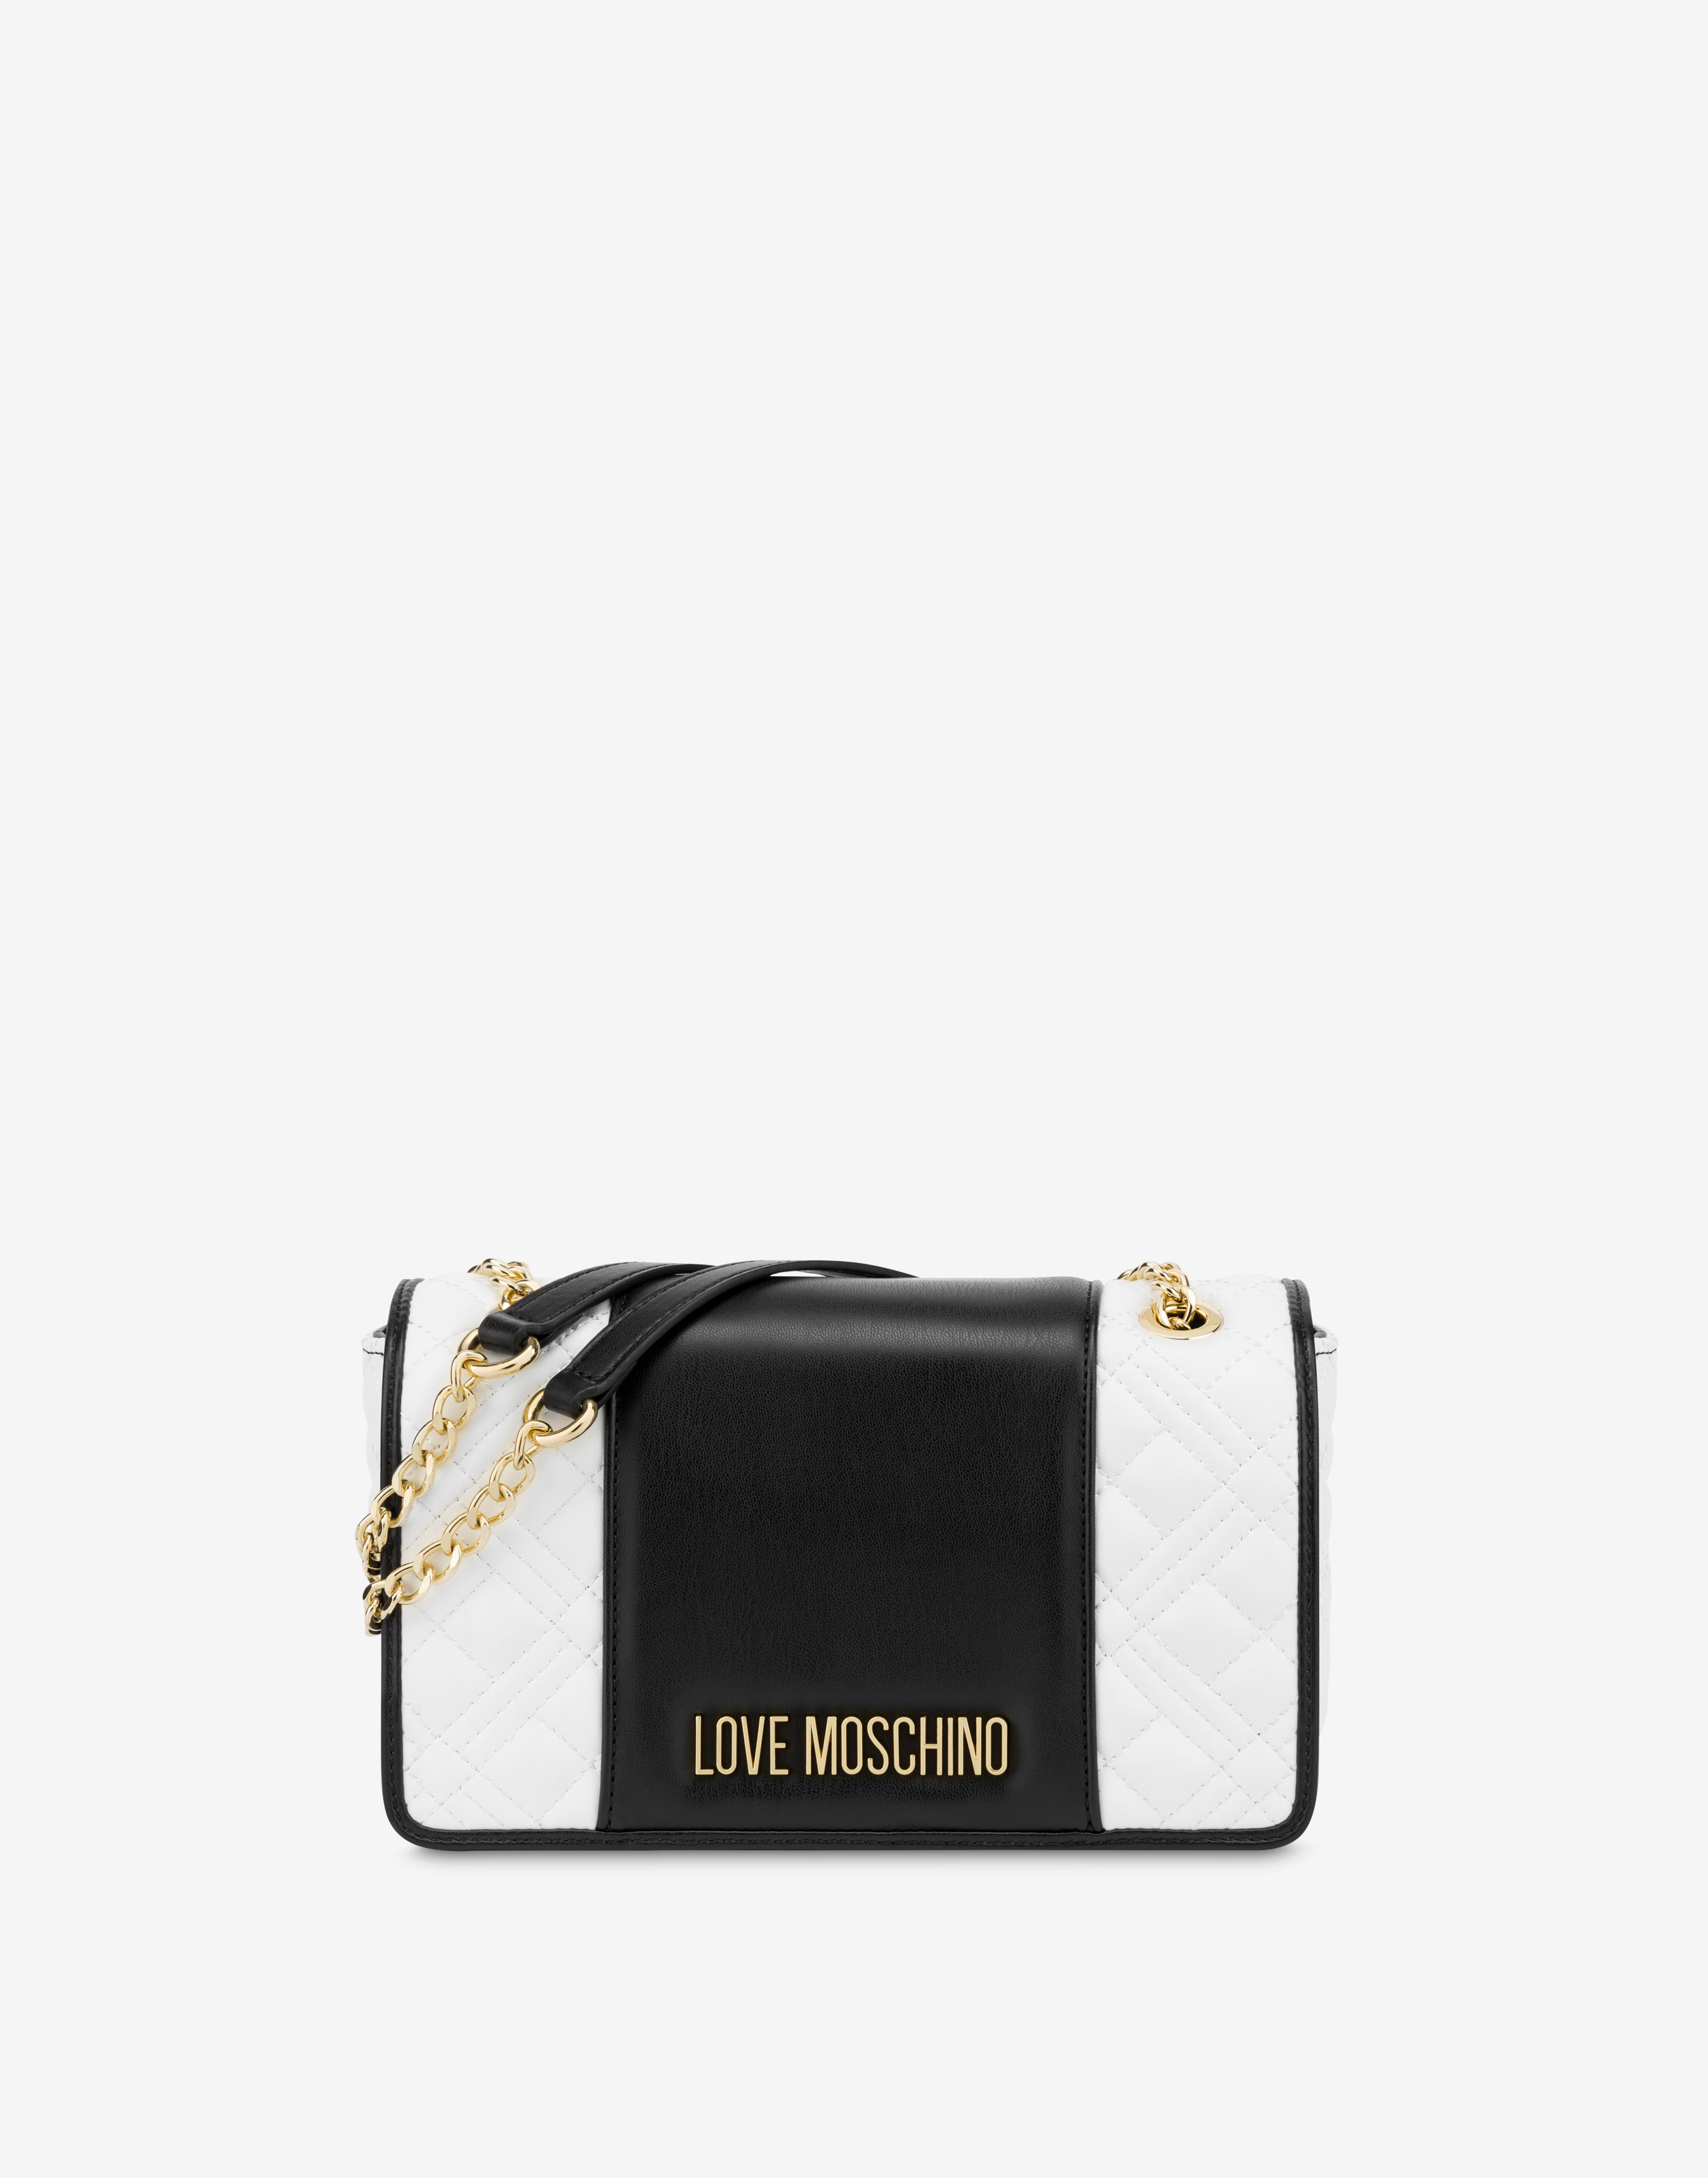 Moschino quilted shoulder bags - Women's handbags